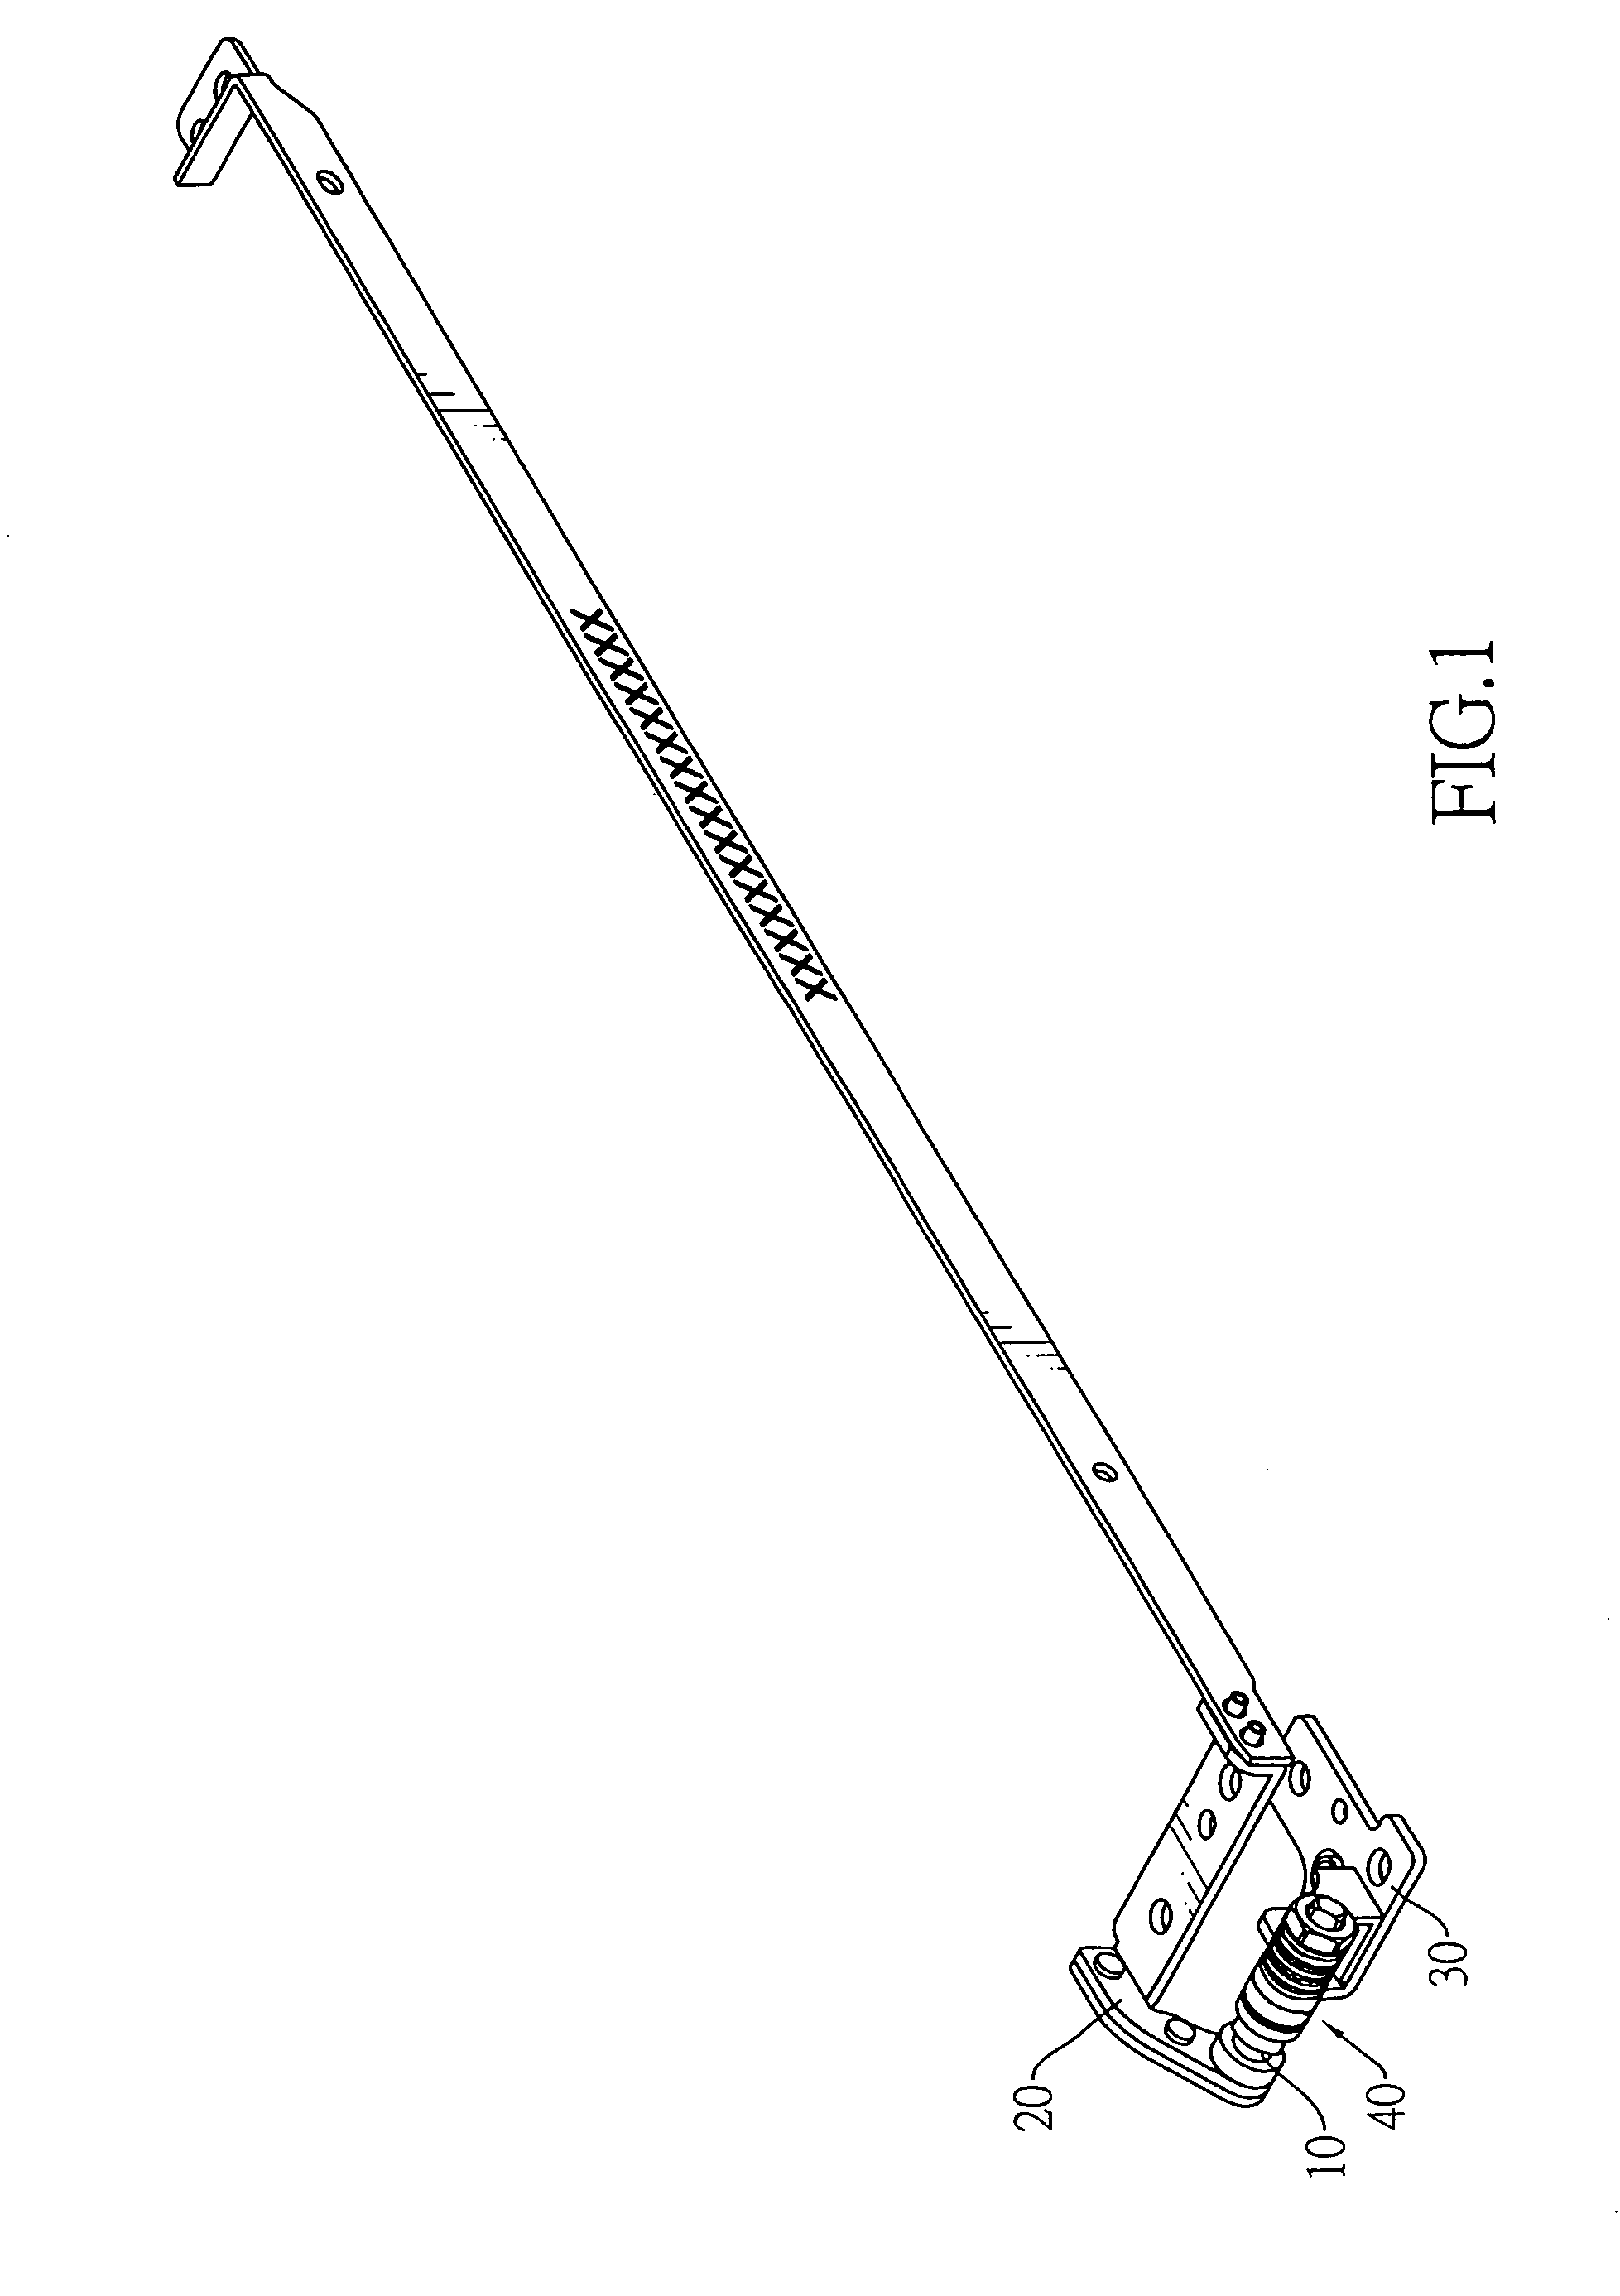 Variable friction hinge